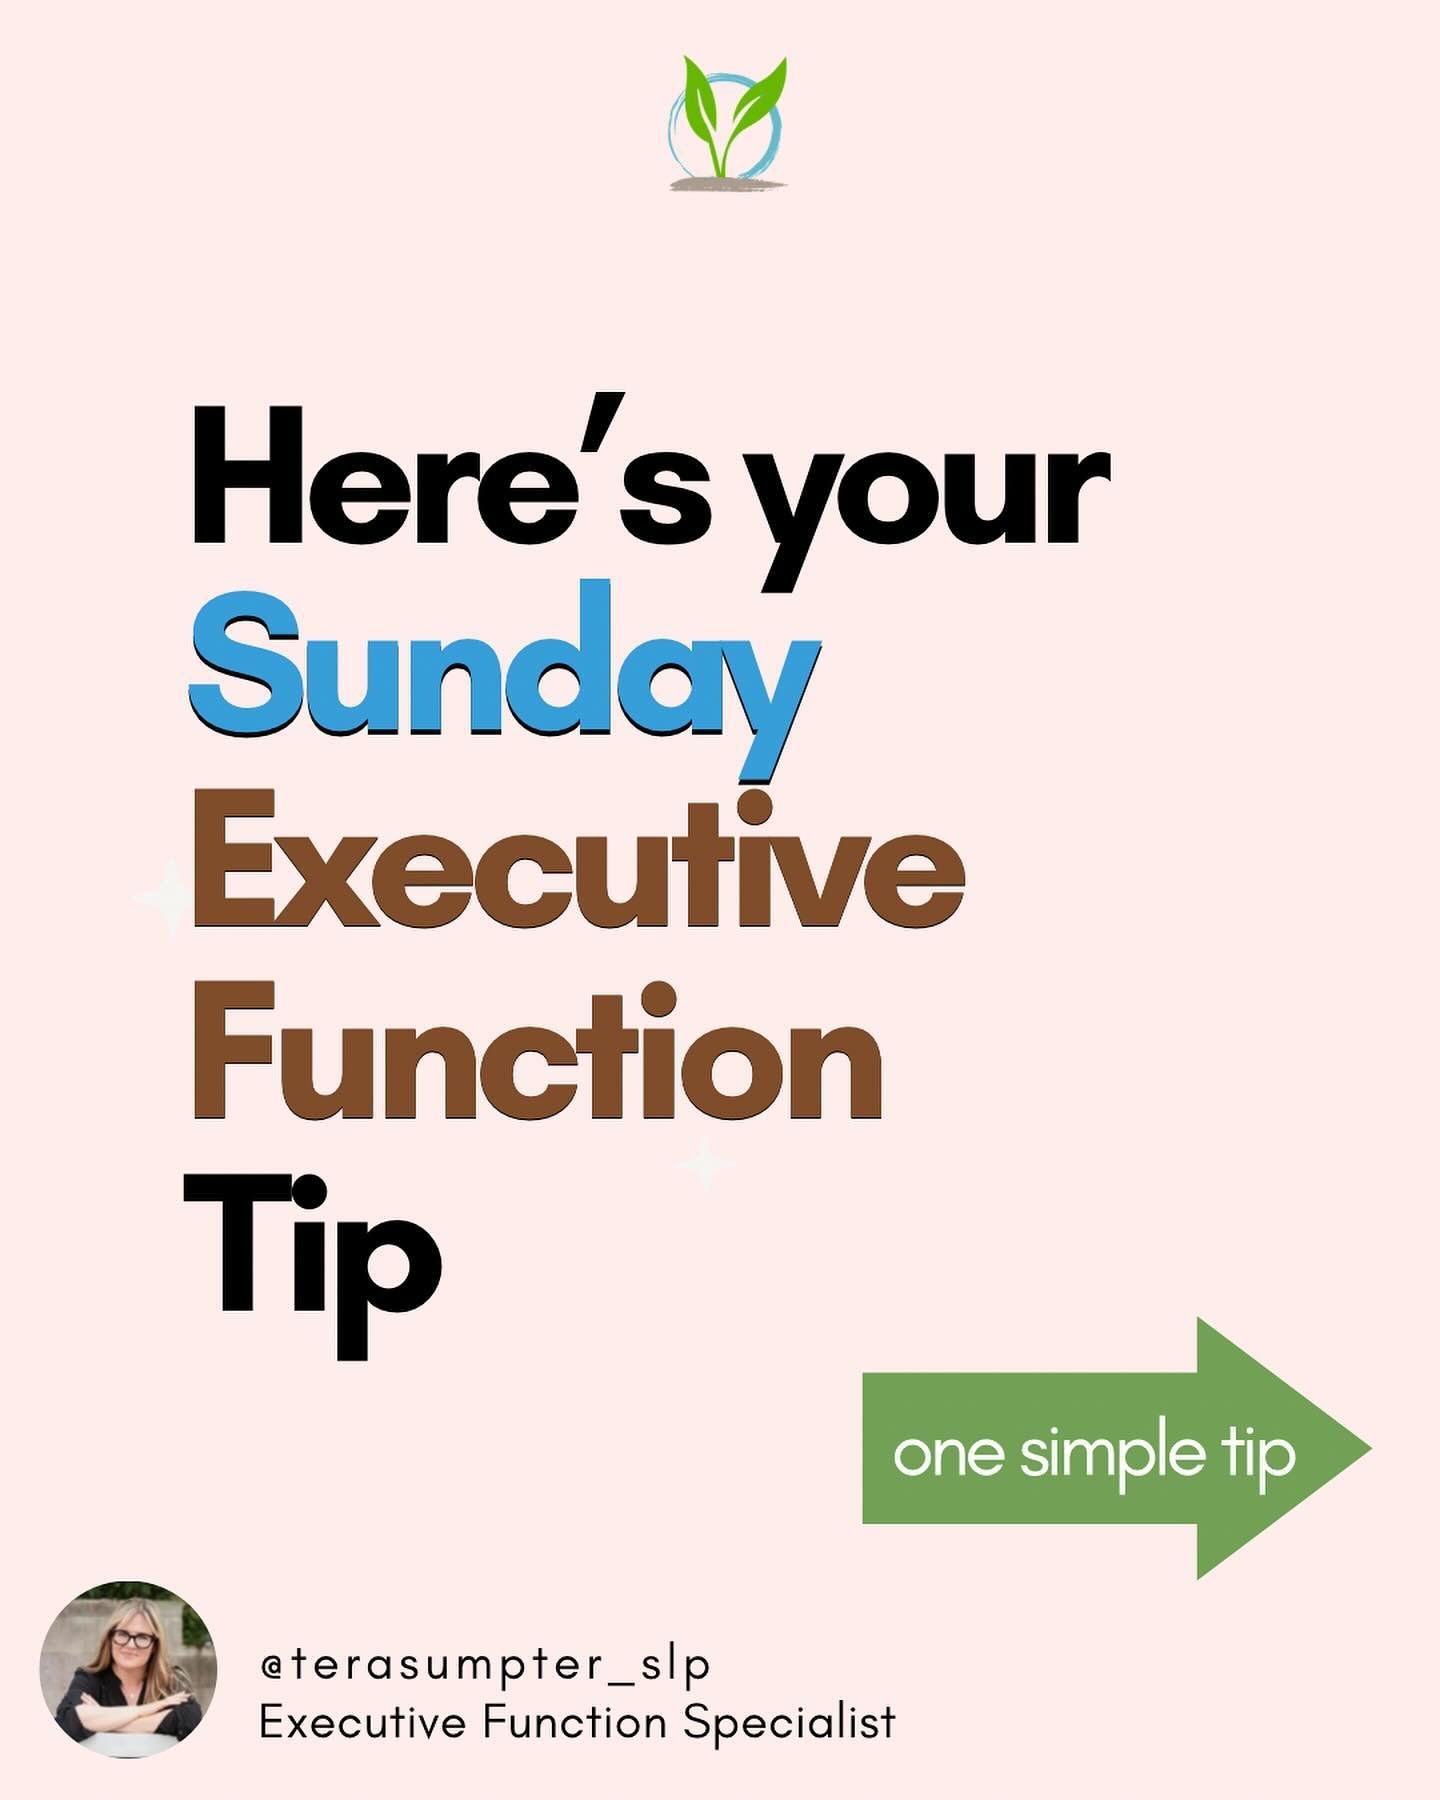 Bring on Monday! 💪🧠⭐️

Combatting the Sunday Scaries one Executive Function tip at a time! 

Procrastination is an initiation need. Initiation is an Executive Function skill. 

Initiation requires skilled planning that we self-evaluate for our own 